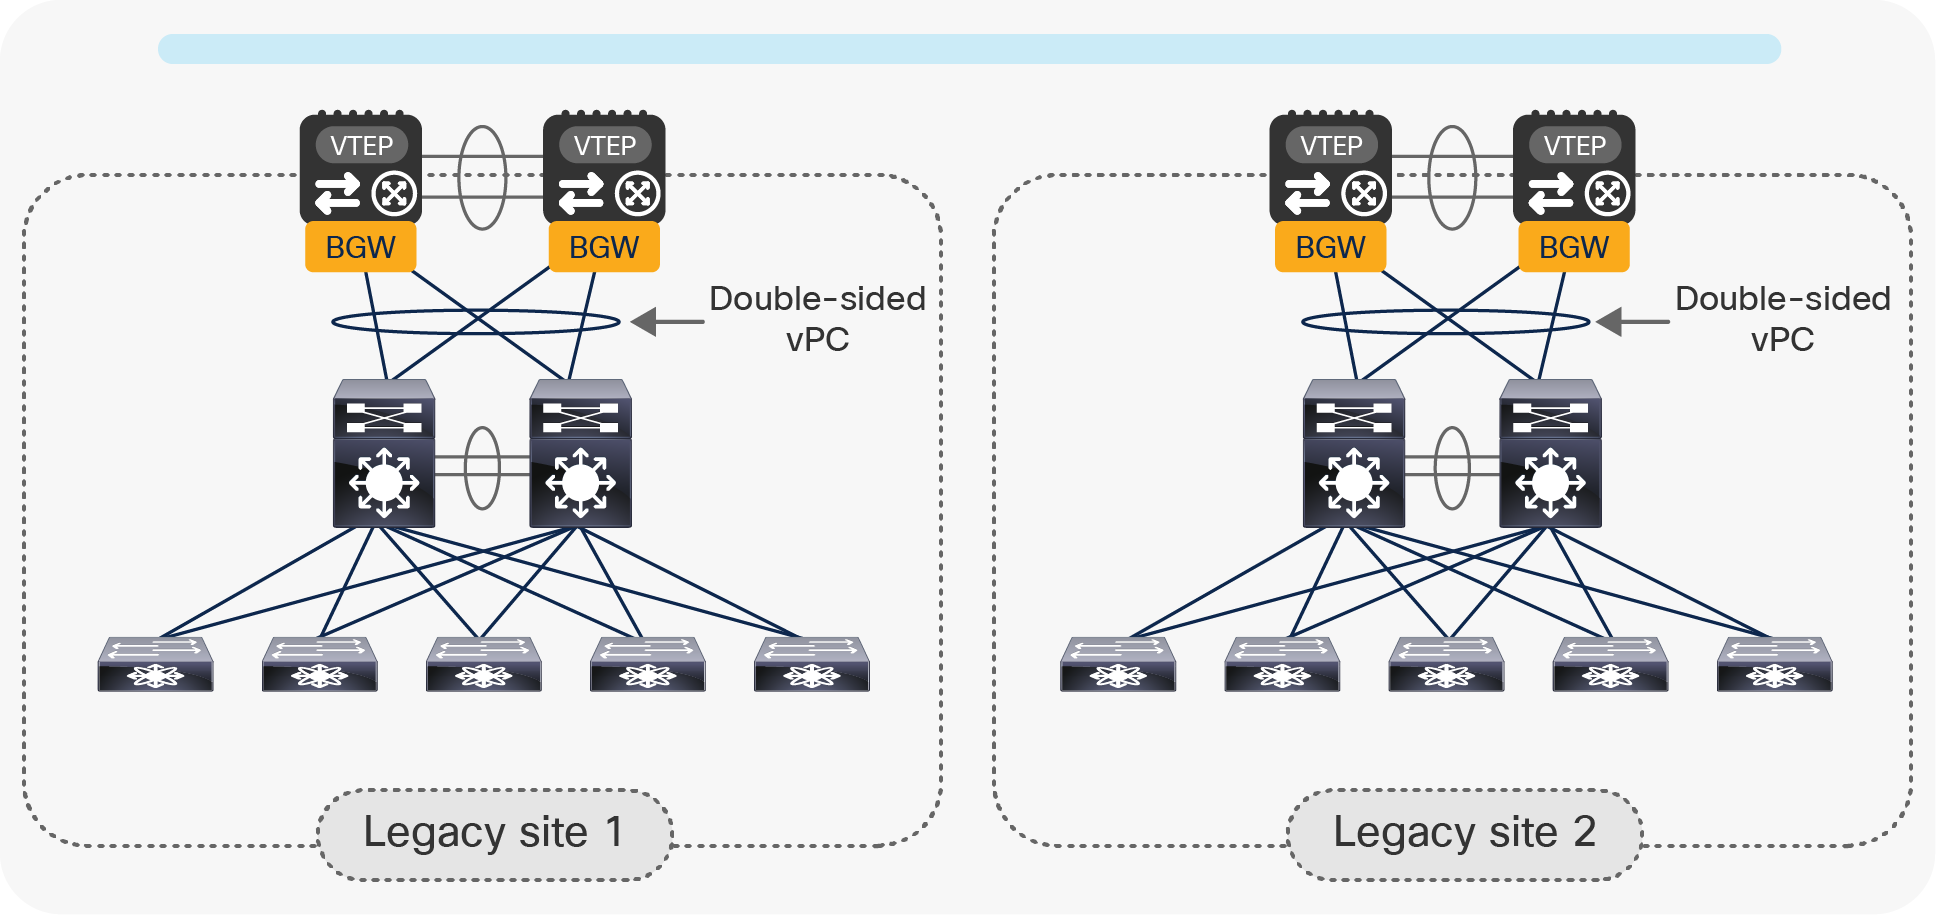 Connecting the vPC BGW nodes to the legacy network using a Layer 2 double-sided vPC